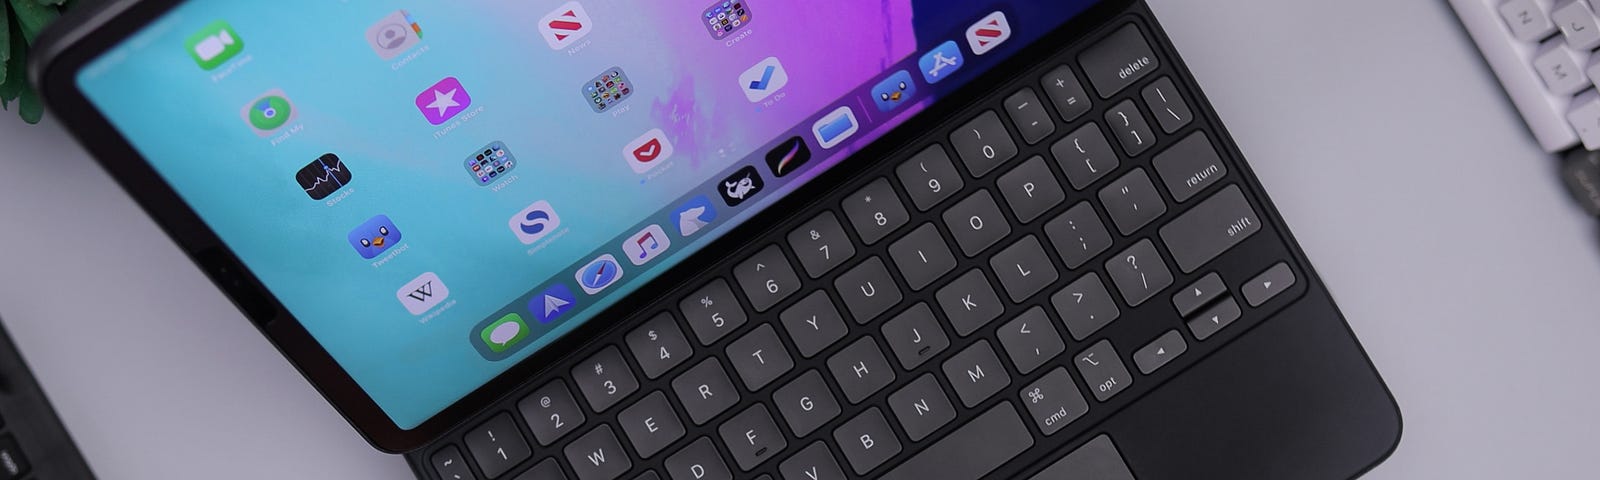 Apple’s magic keyboard. One of the best I have seen from them